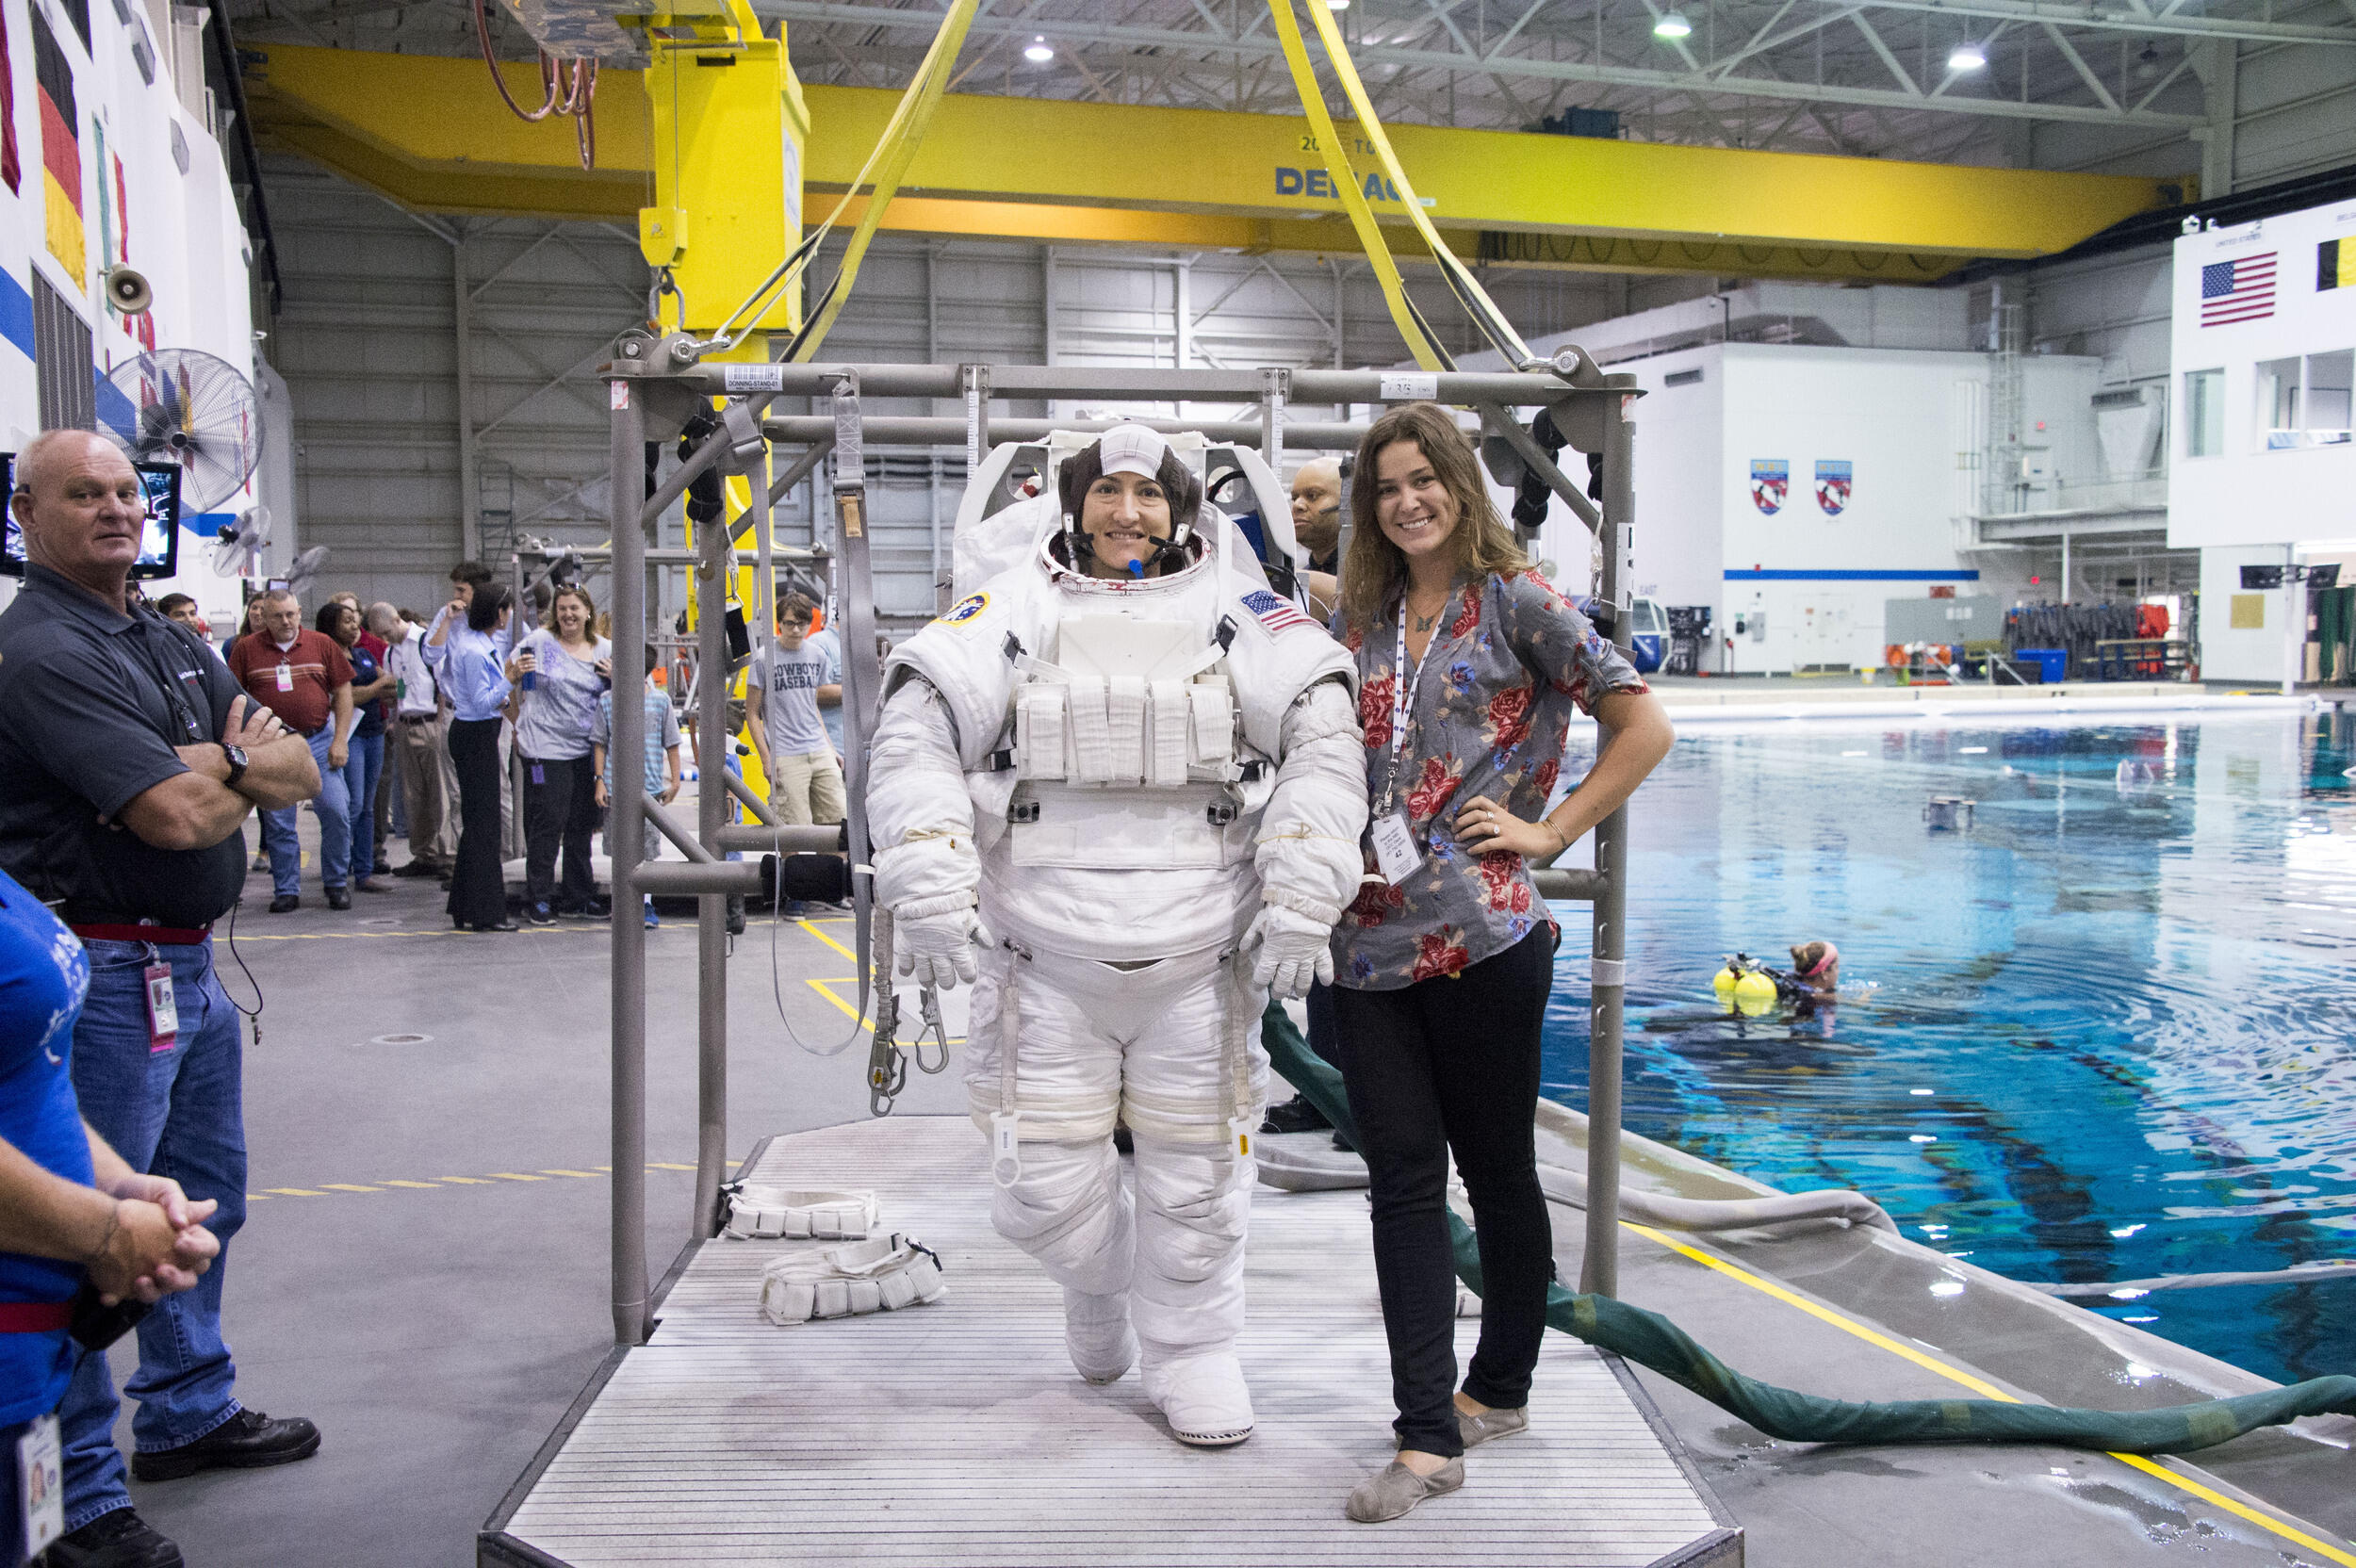 "In the Neutral Buoyancy Lab there is a pool as big as a football field, and about 50 feet deep. In it is a replica of the International Space Station that astronauts will train in. This replicates (almost) the feeling of no gravity." 